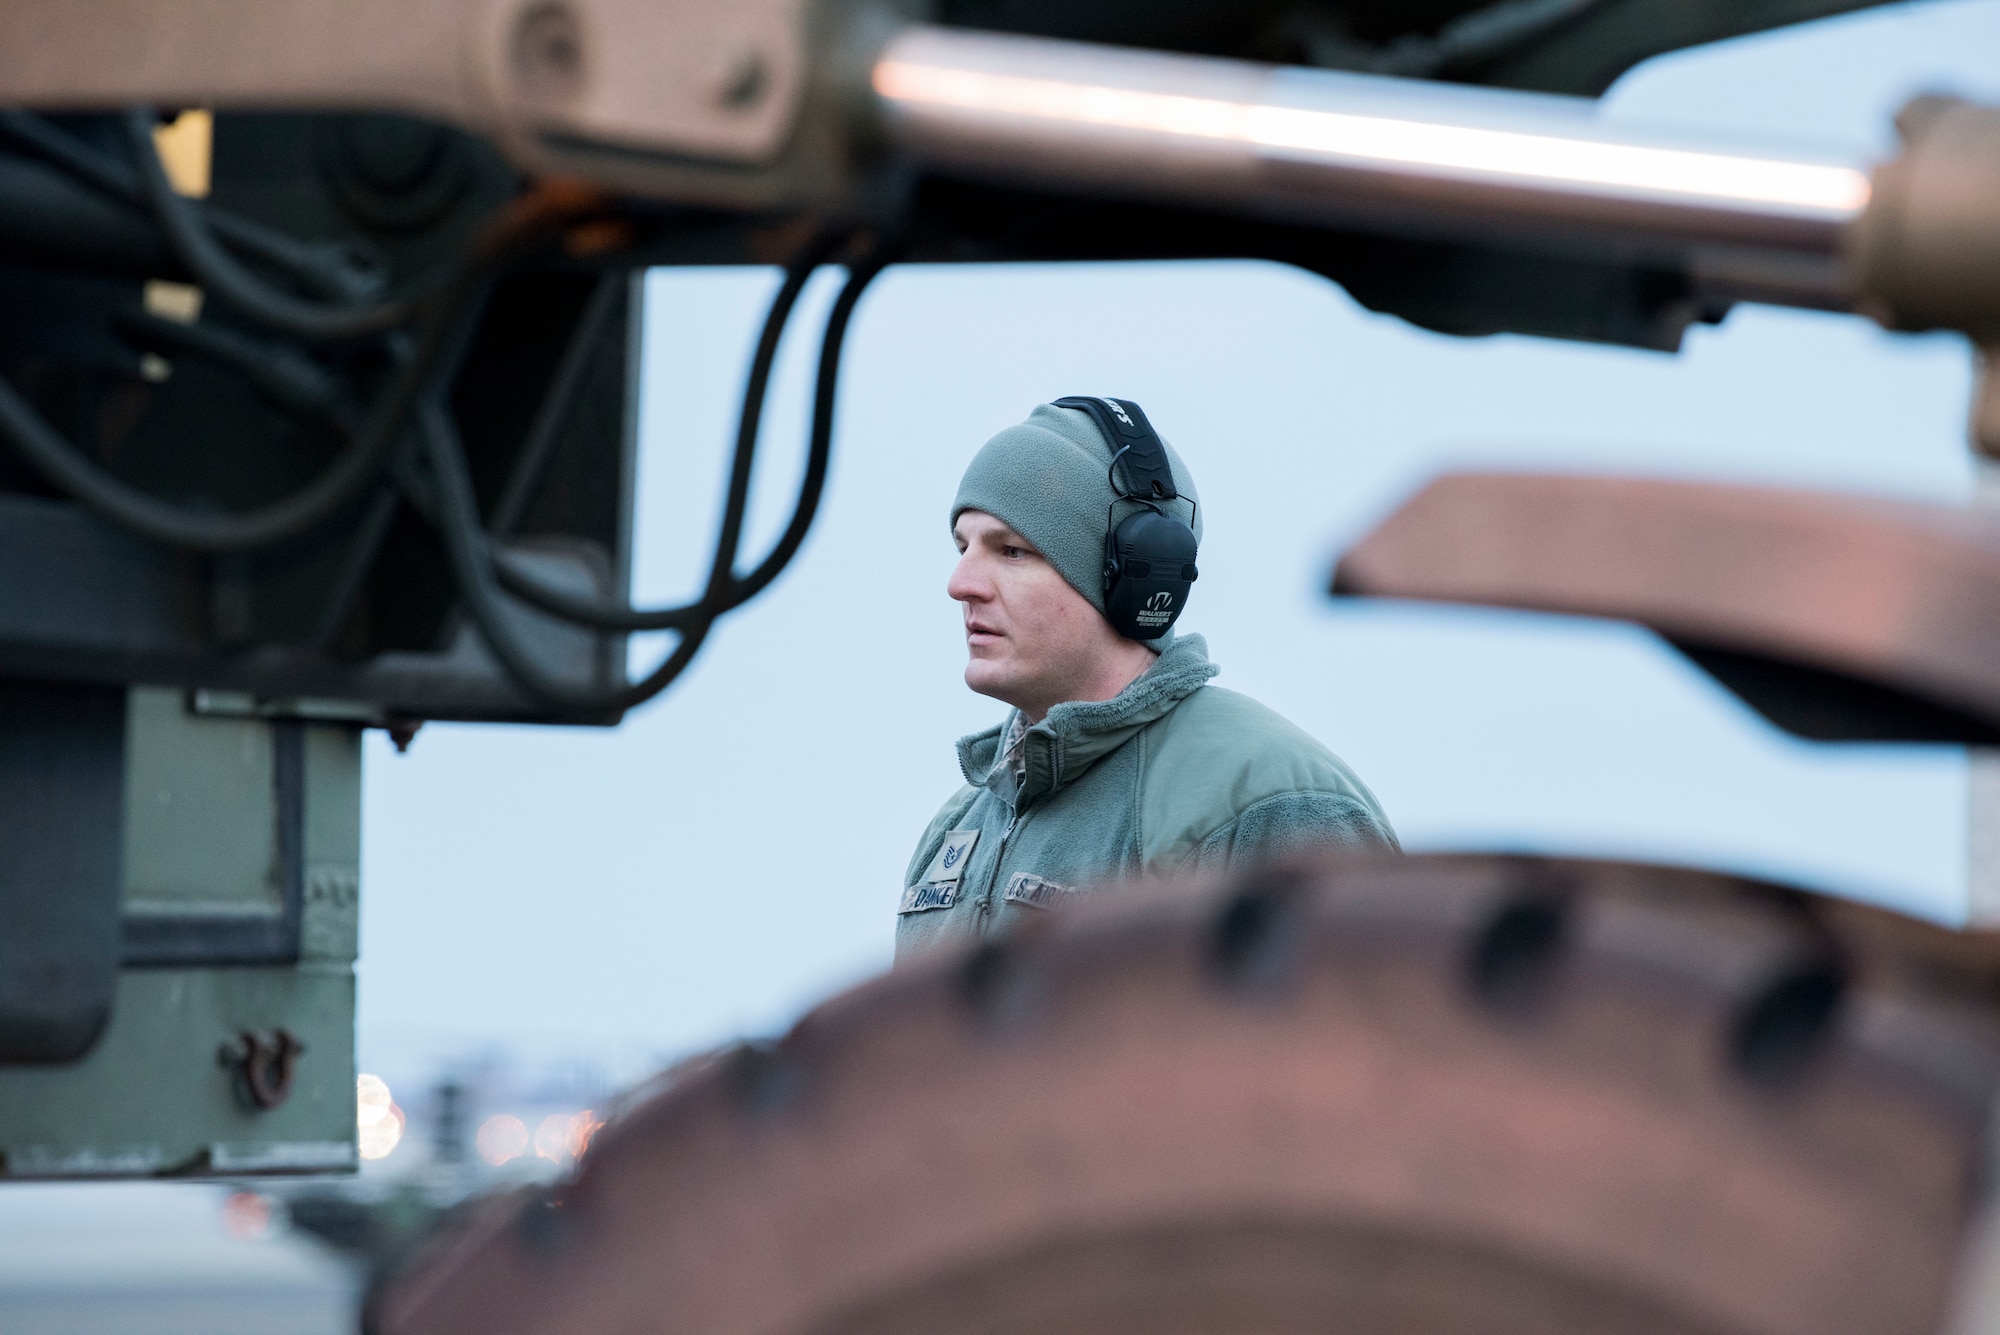 U.S. Air Force Tech. Sgt. Derrick Danker, 185th Air Refueling Wing Aerial Transportation Craftsman assigned to Iowa Air National Guard, supervises cargo movement outside the Joint Mobility Complex during Polar Force 19-4 at Joint Base Elmendorf-Richardson, Alaska, March 25, 2019. Polar Force is a two-week exercise designed to test JBER’s mission readiness, and develops the skills service members require to face adverse situations.